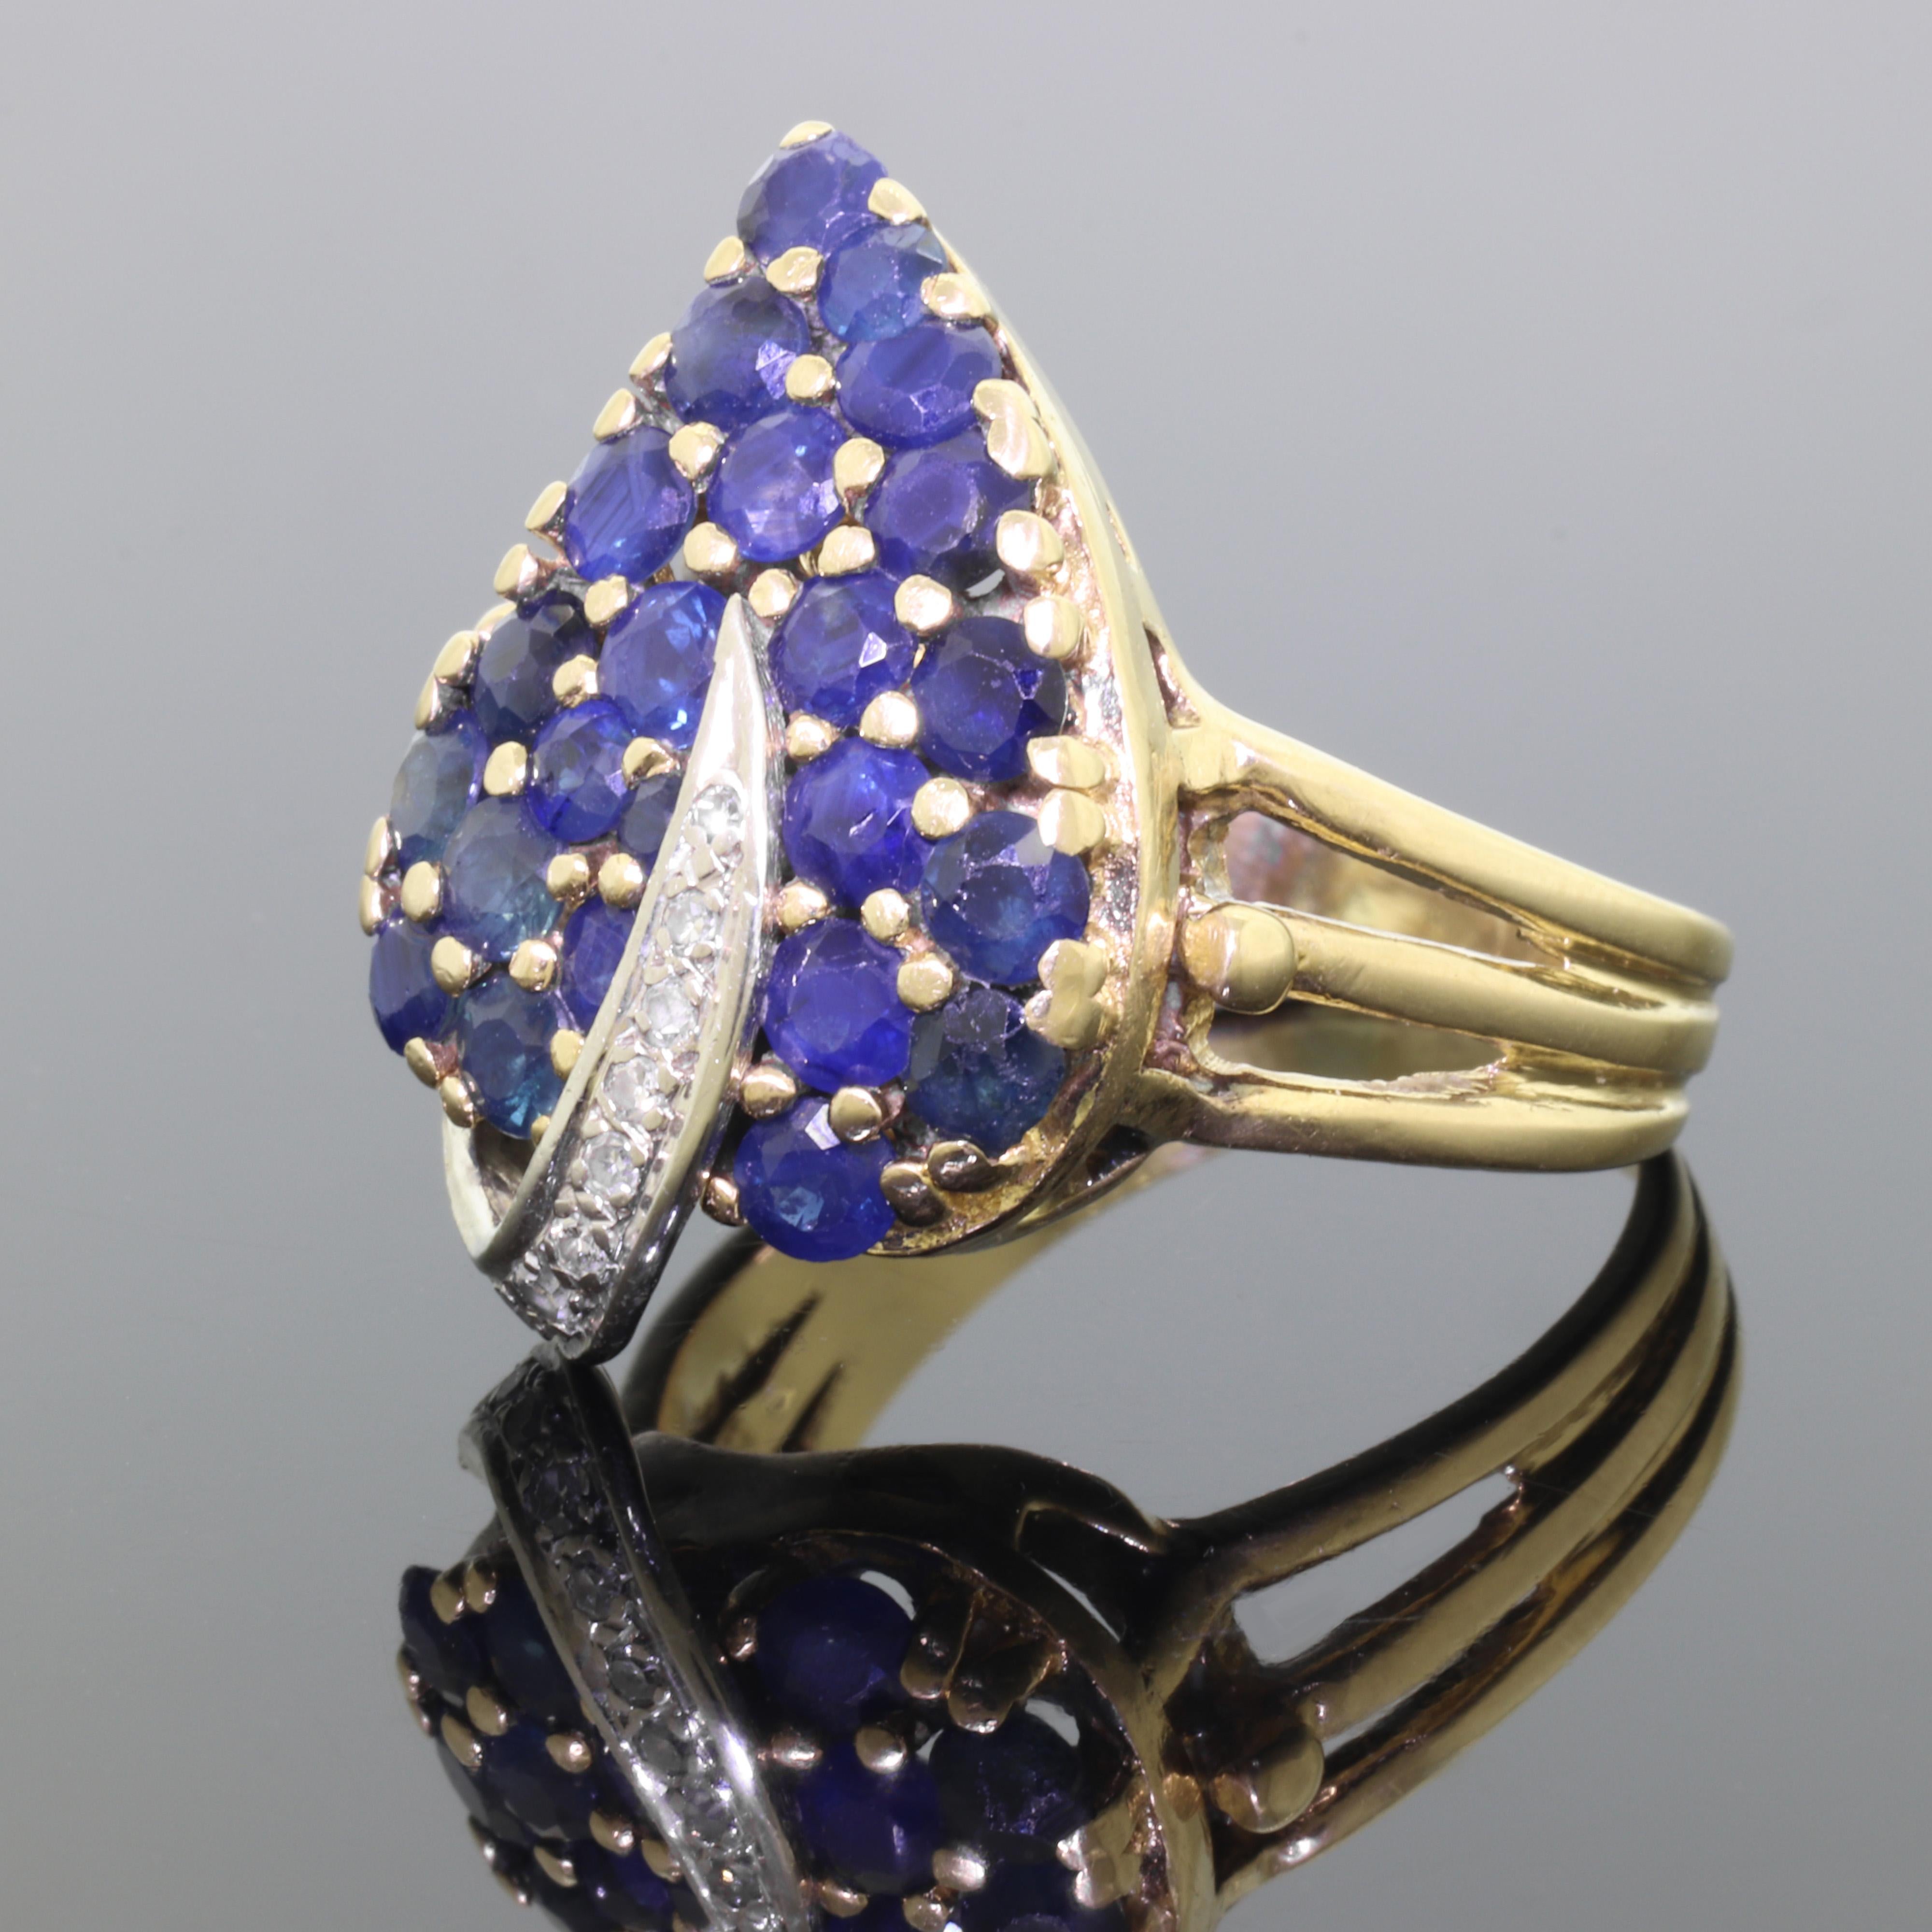 This ring is beautiful and quite unusual in person. A total of 24 perfectly color matched natural Sapphire gemstones are attractively set in an elegant leaf design. The vein / midrib has a nice contrast of white gold and has 8 small diamonds to